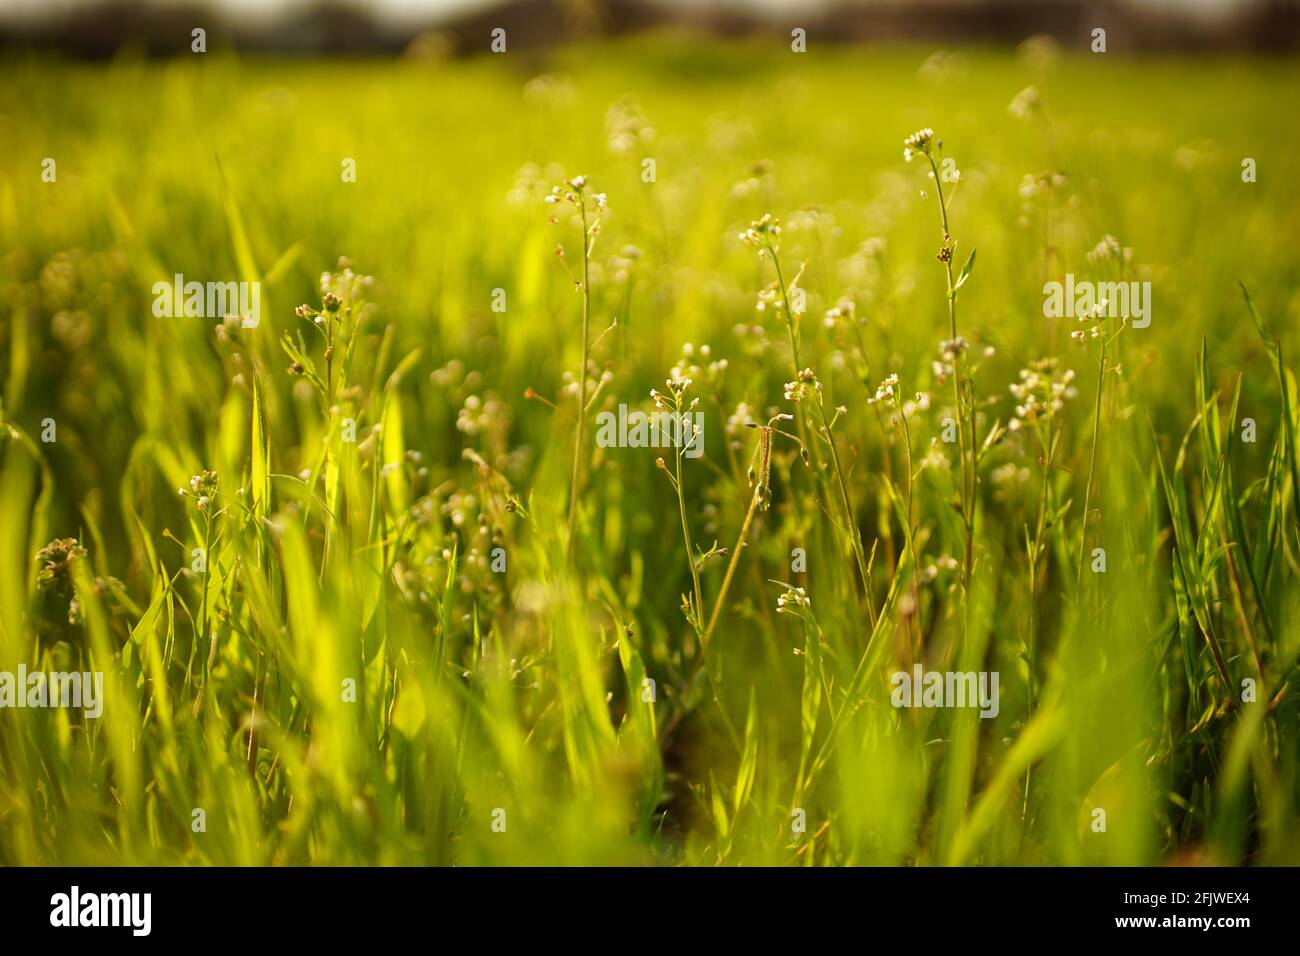 Amazing natural background with wild white flowers among the spring green grass in sunny day. Stock Photo